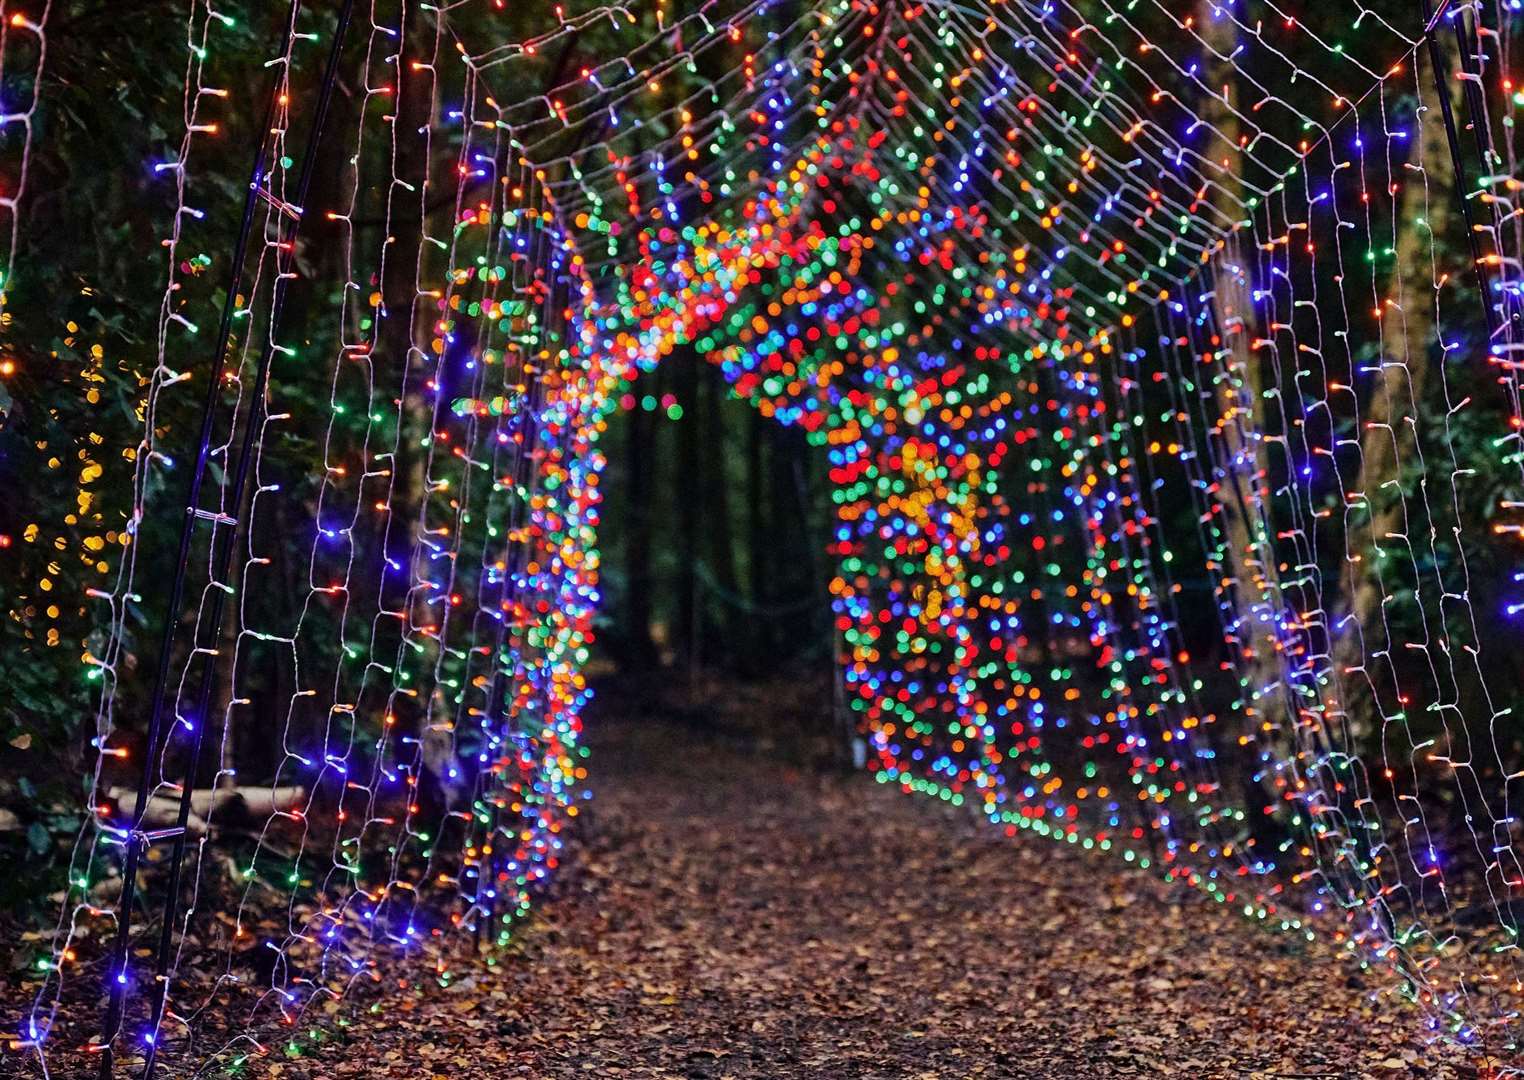 Follow the illuminated path into the woodlands where you will find Betteshanger’s creepy Nightmare Before Christmas trail. Picture: Tom Webb